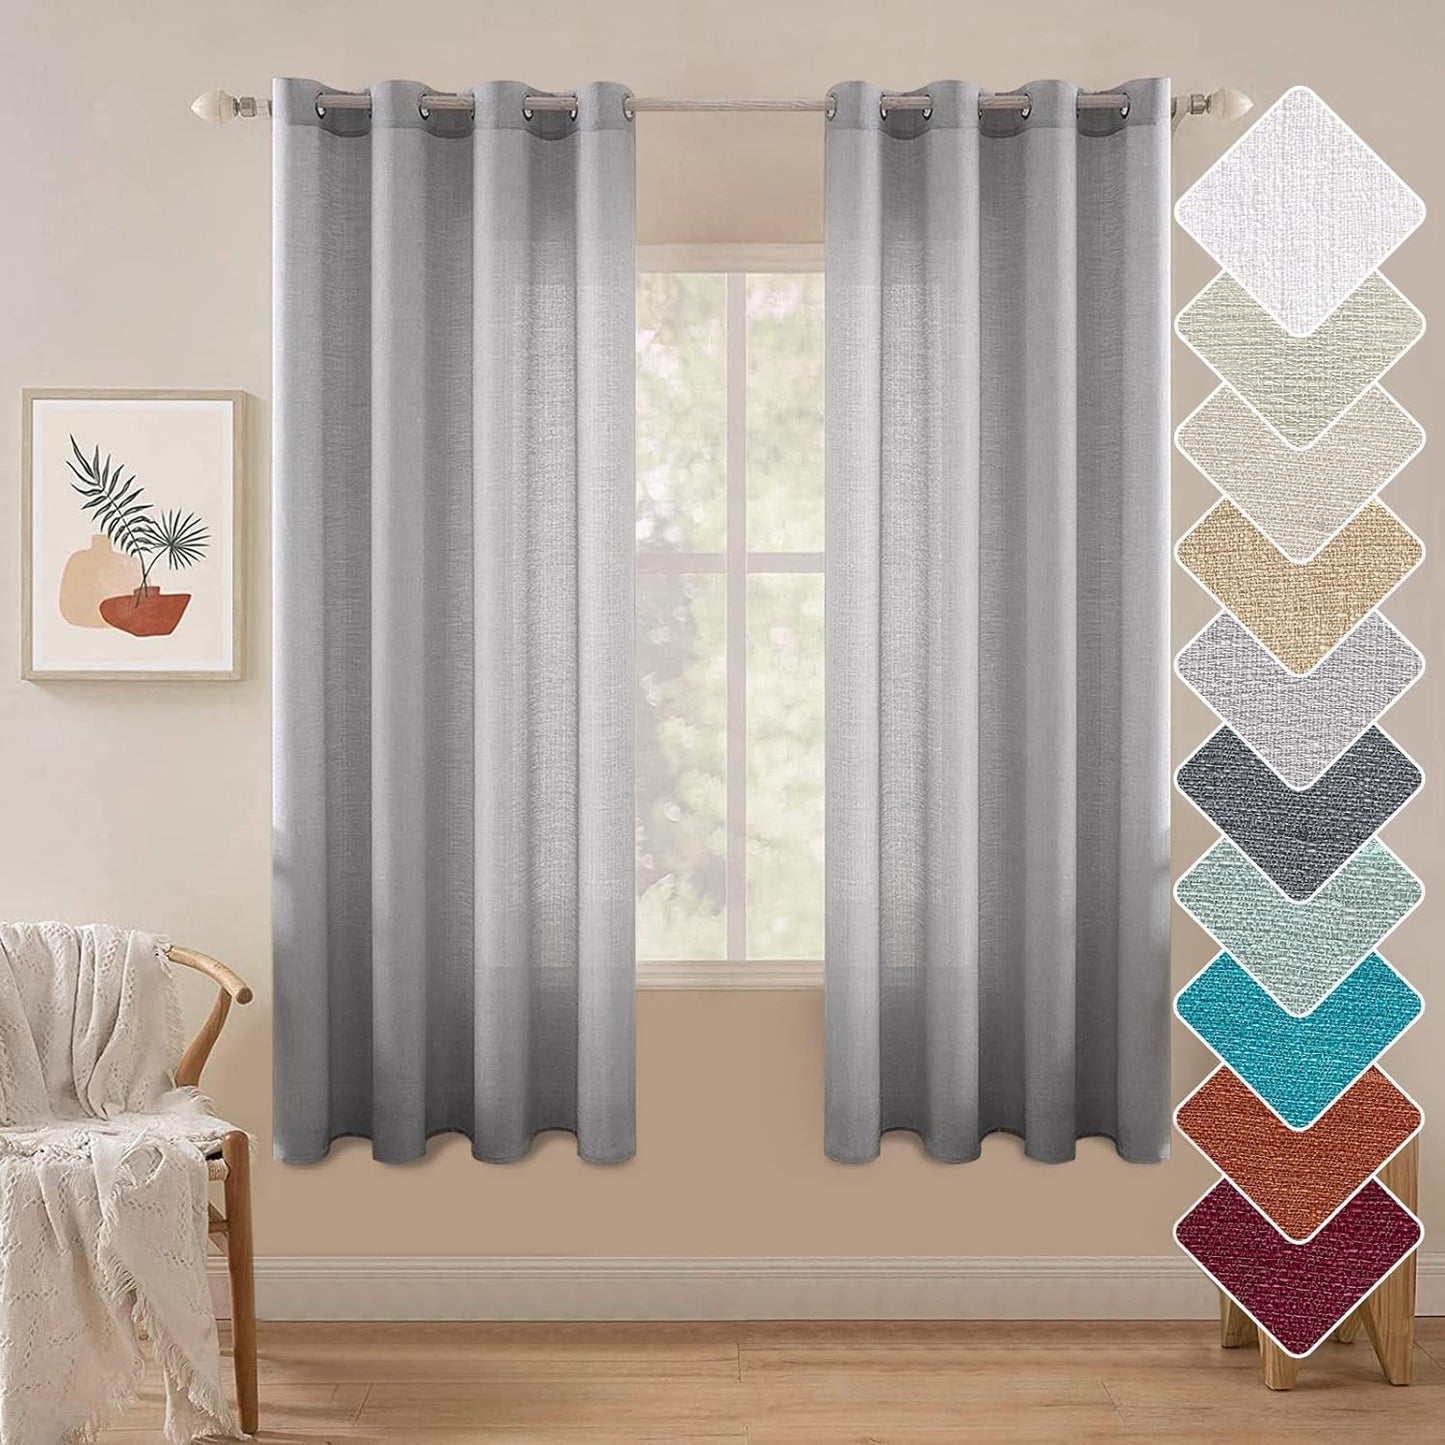 MIULEE Burnt Orange Linen Semi Sheer Curtains 2 Panels for Living Room Bedroom Linen Textured Light Filtering Privacy Window Curtains Terracotta Grommet Drapes Rust Boho Fall Decor W 52 X L 84 Inches  MIULEE Grommet | Silver Grey W52 X L63 